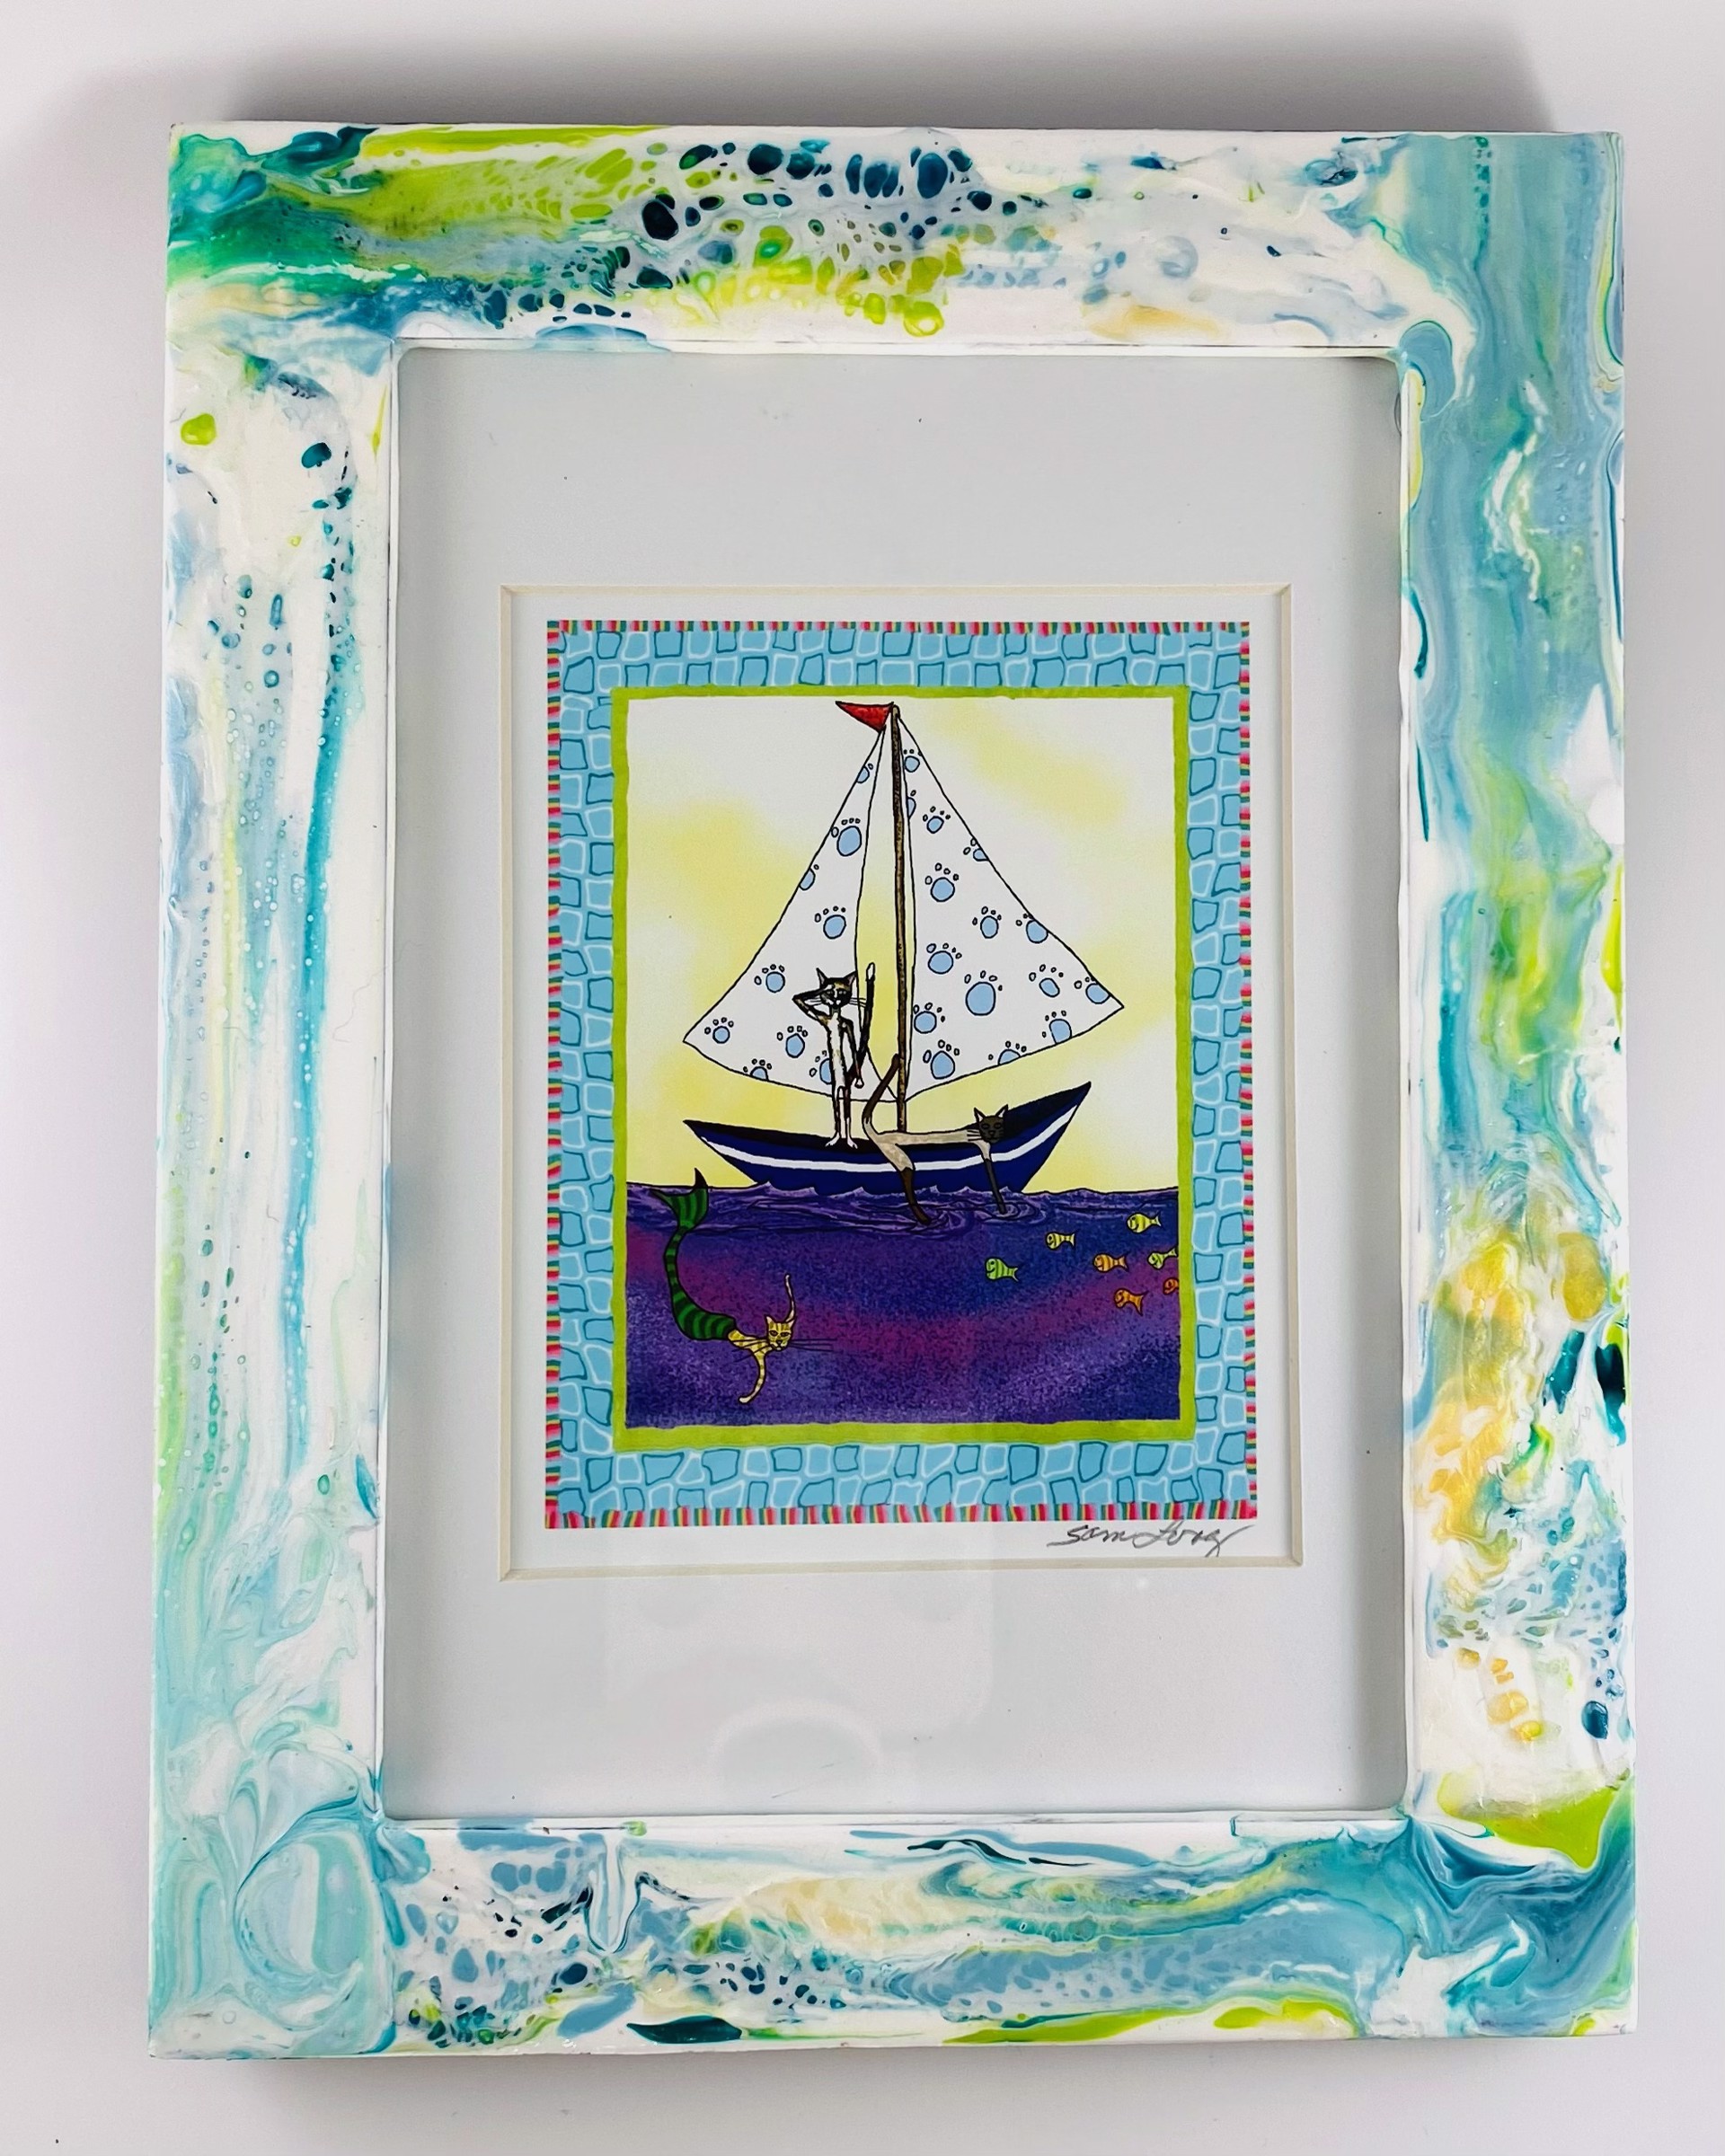 SAM21-11 Print- Hand Painted Frame, Matted, Under Glass by Samantha Long